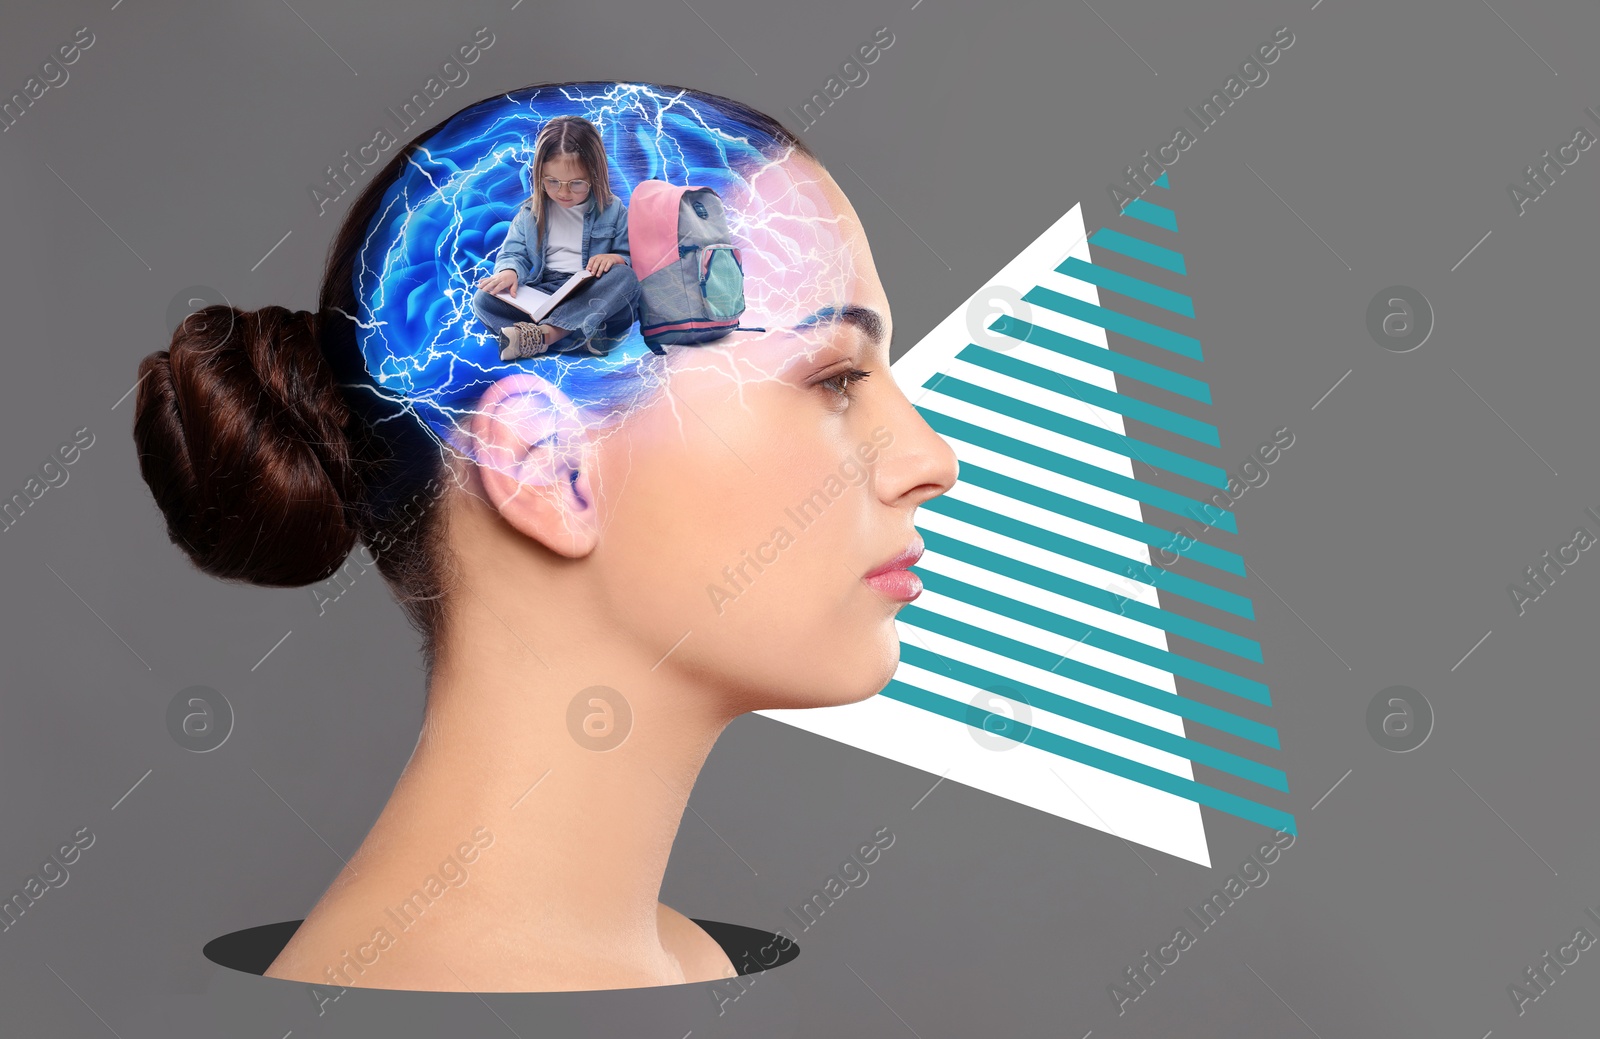 Image of Suffering from amnesia. Woman trying to remember child on color background. Illustration of brain with flashlights